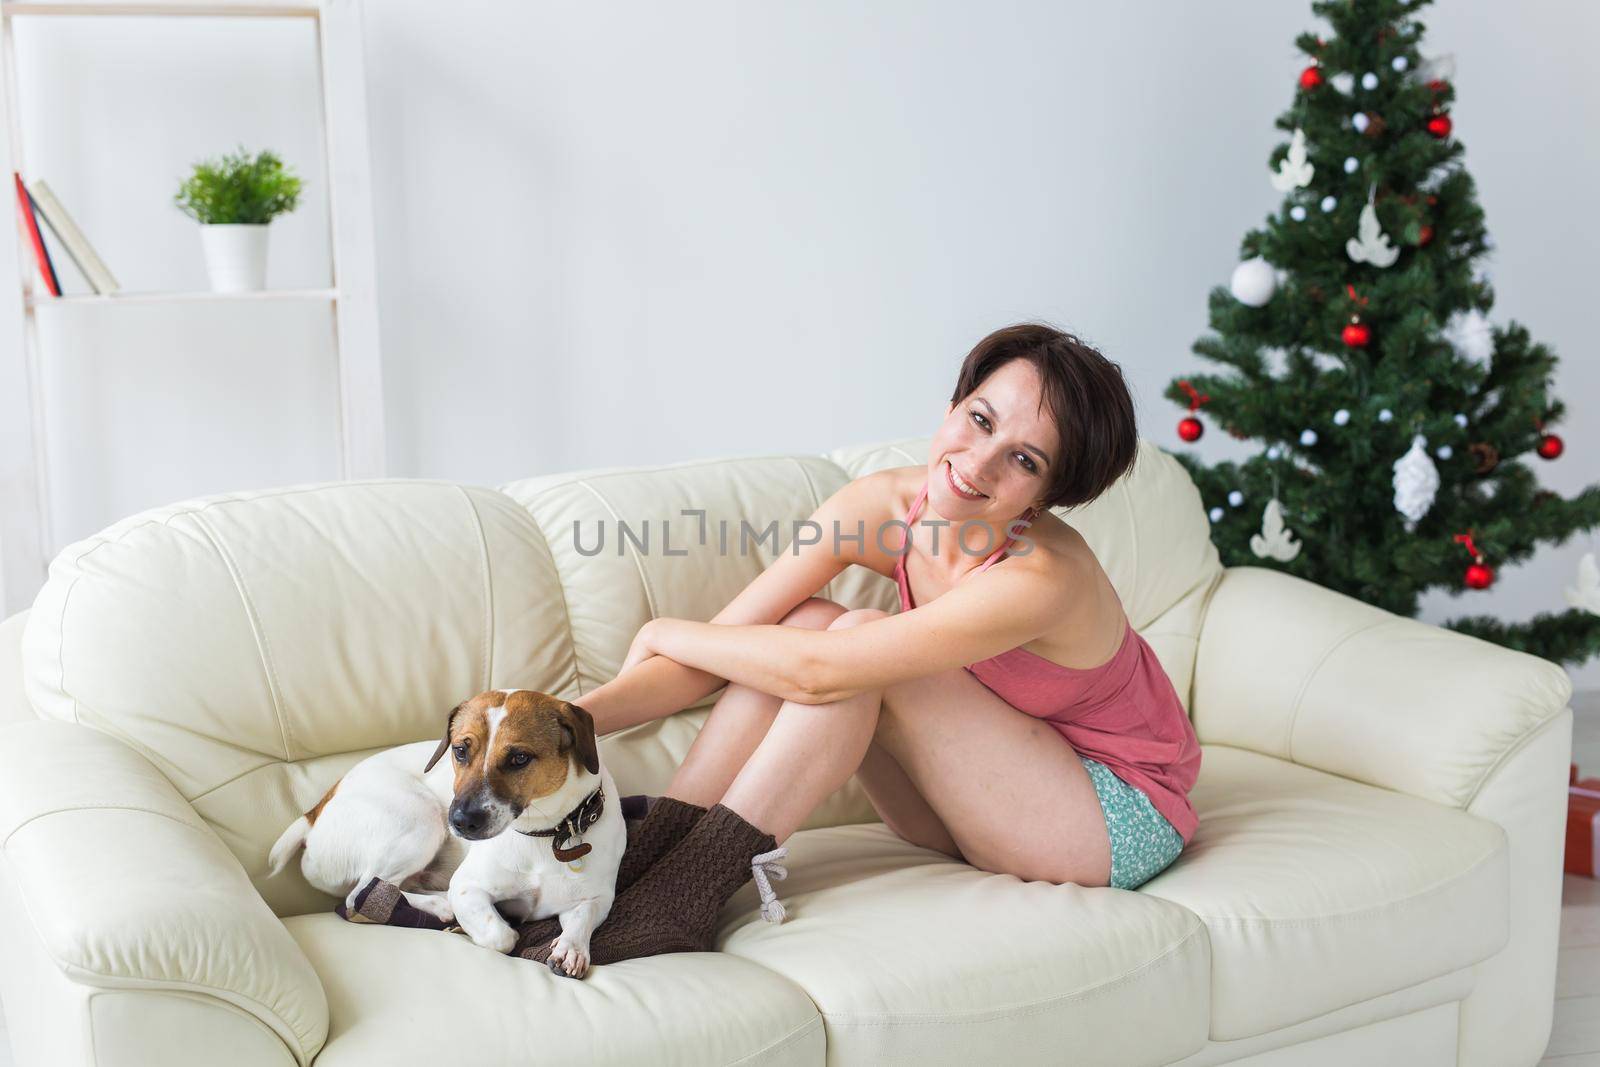 Happy woman with dog. Christmas tree with presents under it. Decorated living room by Satura86